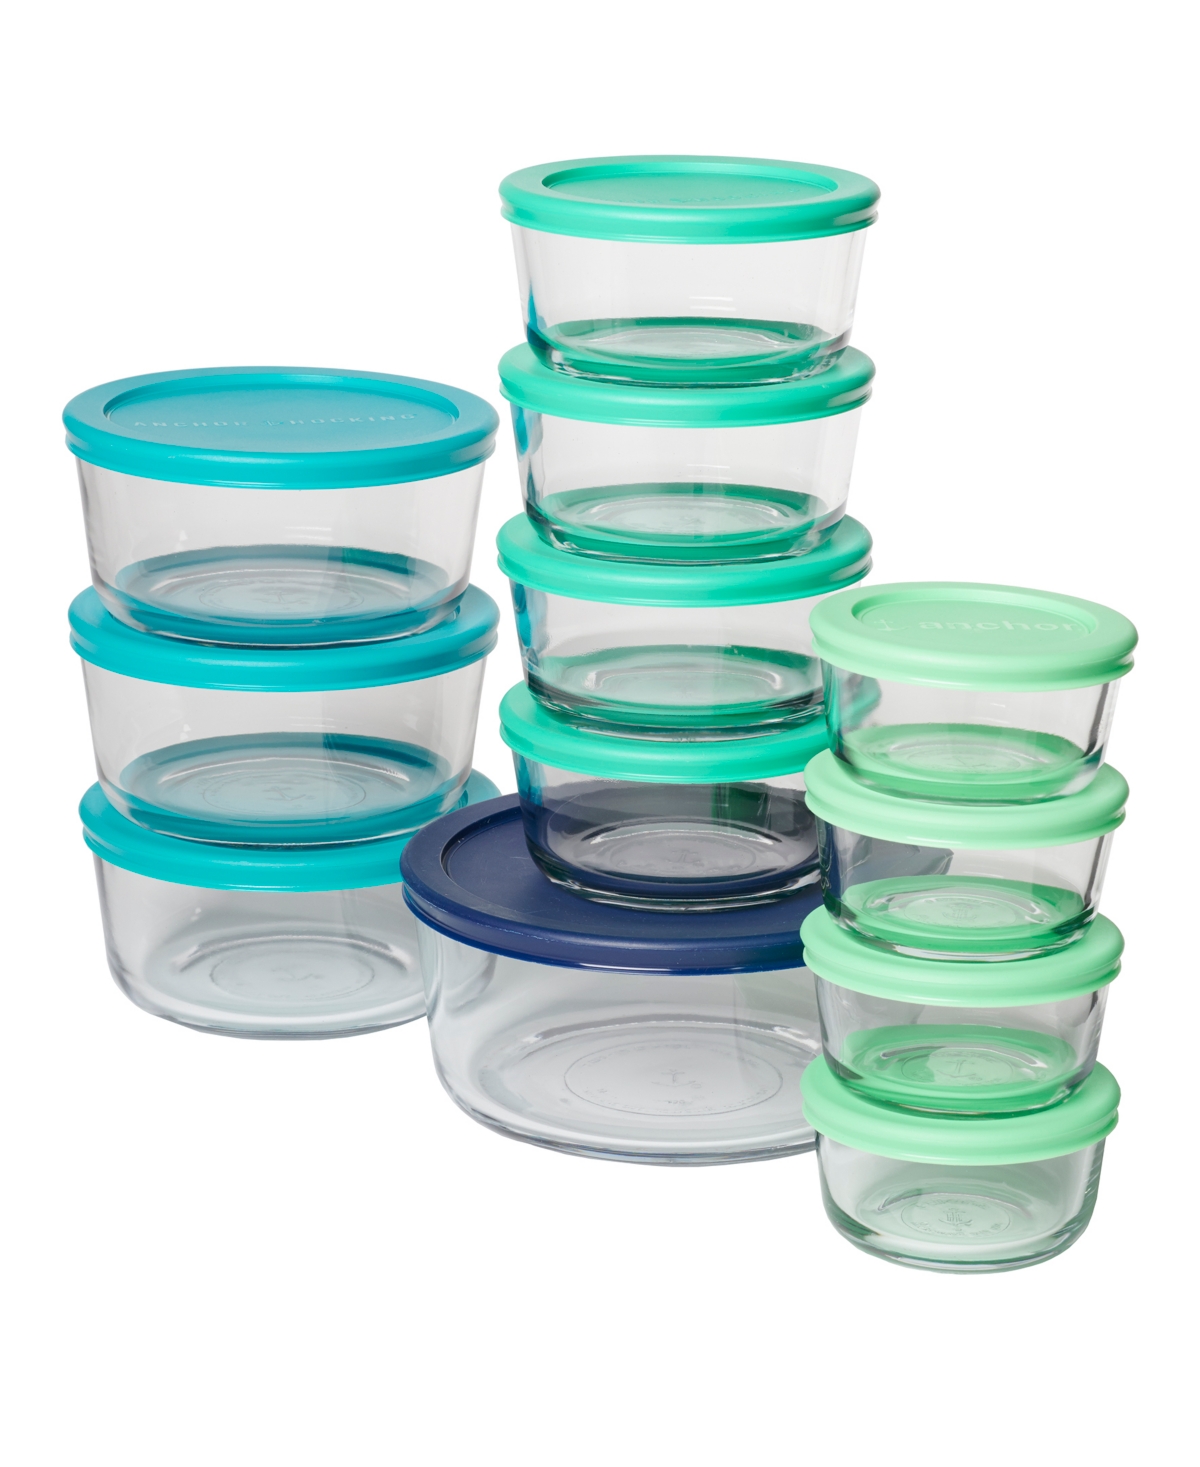 24-Piece Anchor Hocking Food Storage Set w/ SnugFit Lids $29.99 + Free Store Pickup at Macy's or F/S on Orders $25+